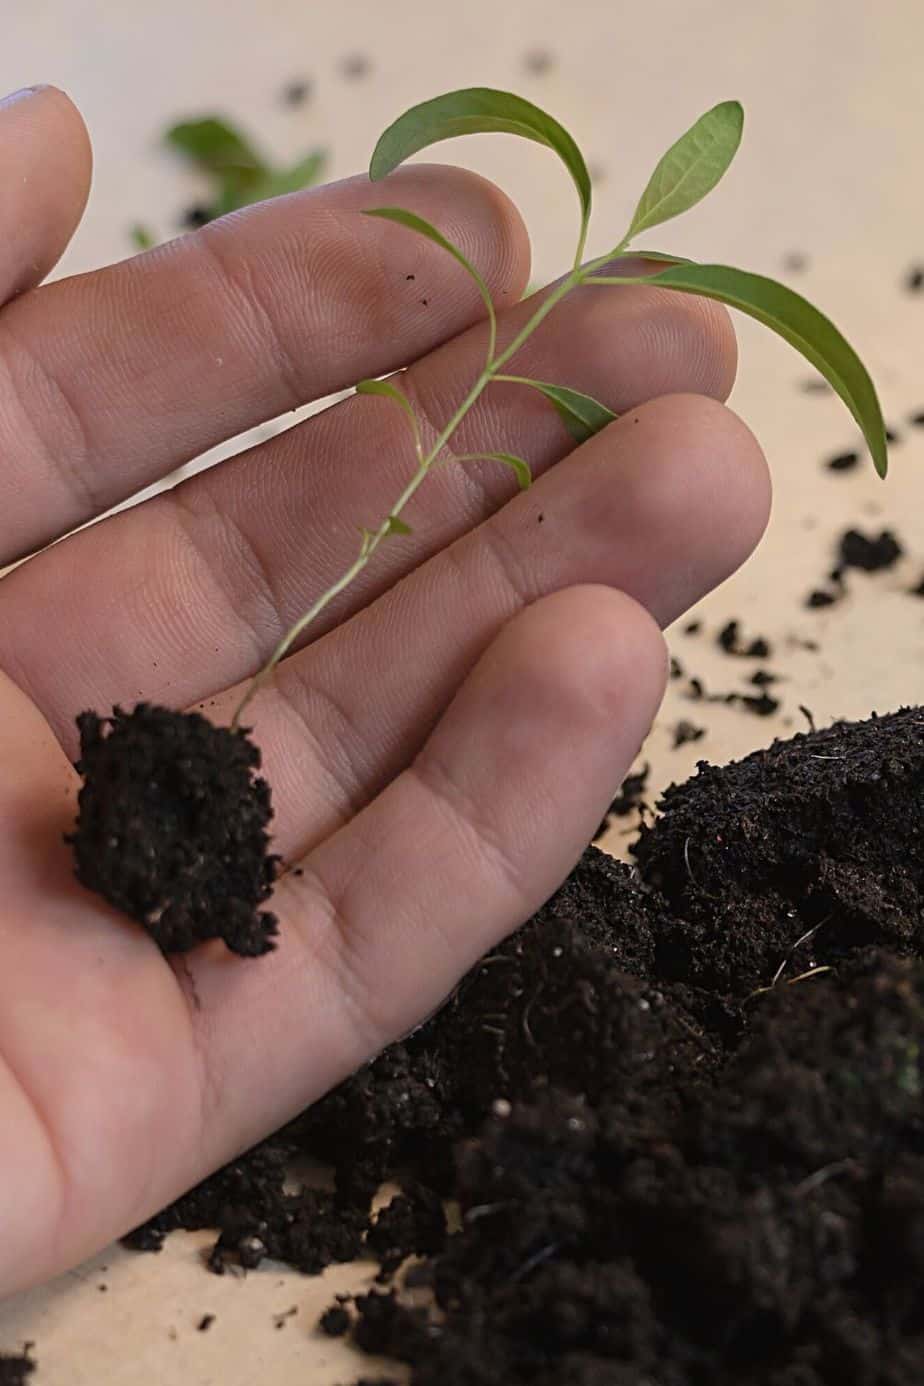 Once the eucalyptus seeds have germinated, you can transplant them in a bigger pot with fresh, peat-free soil